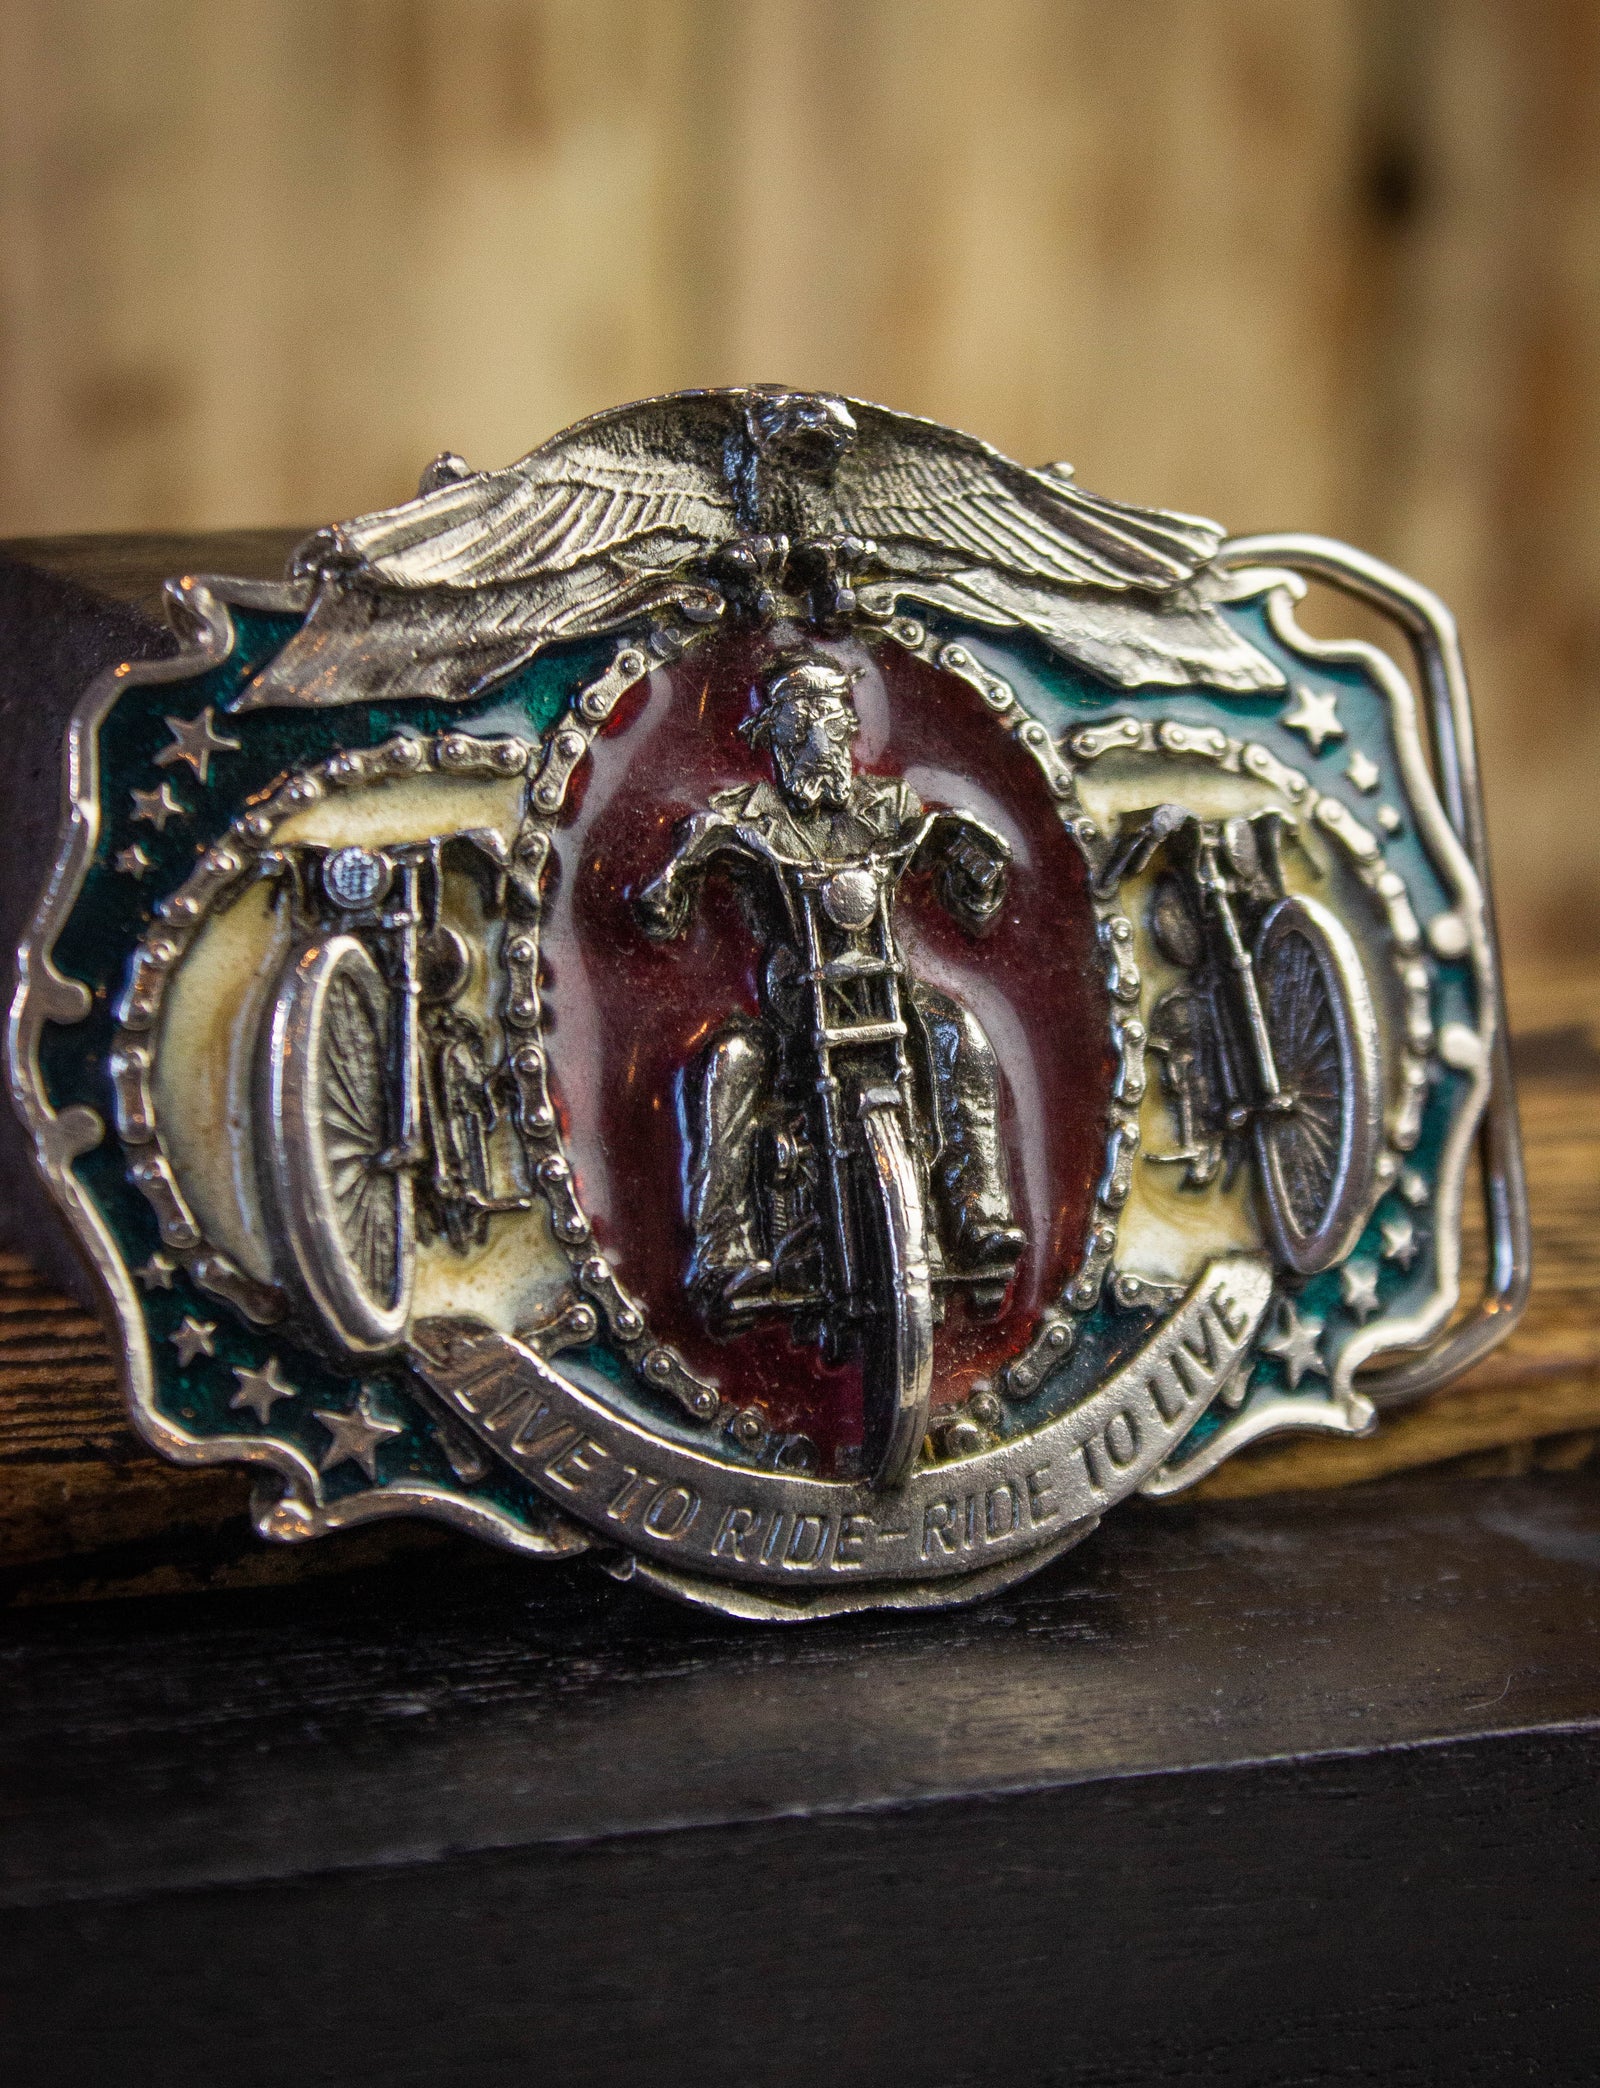 Vintage Live To Ride, Ride To Live Belt Buckle